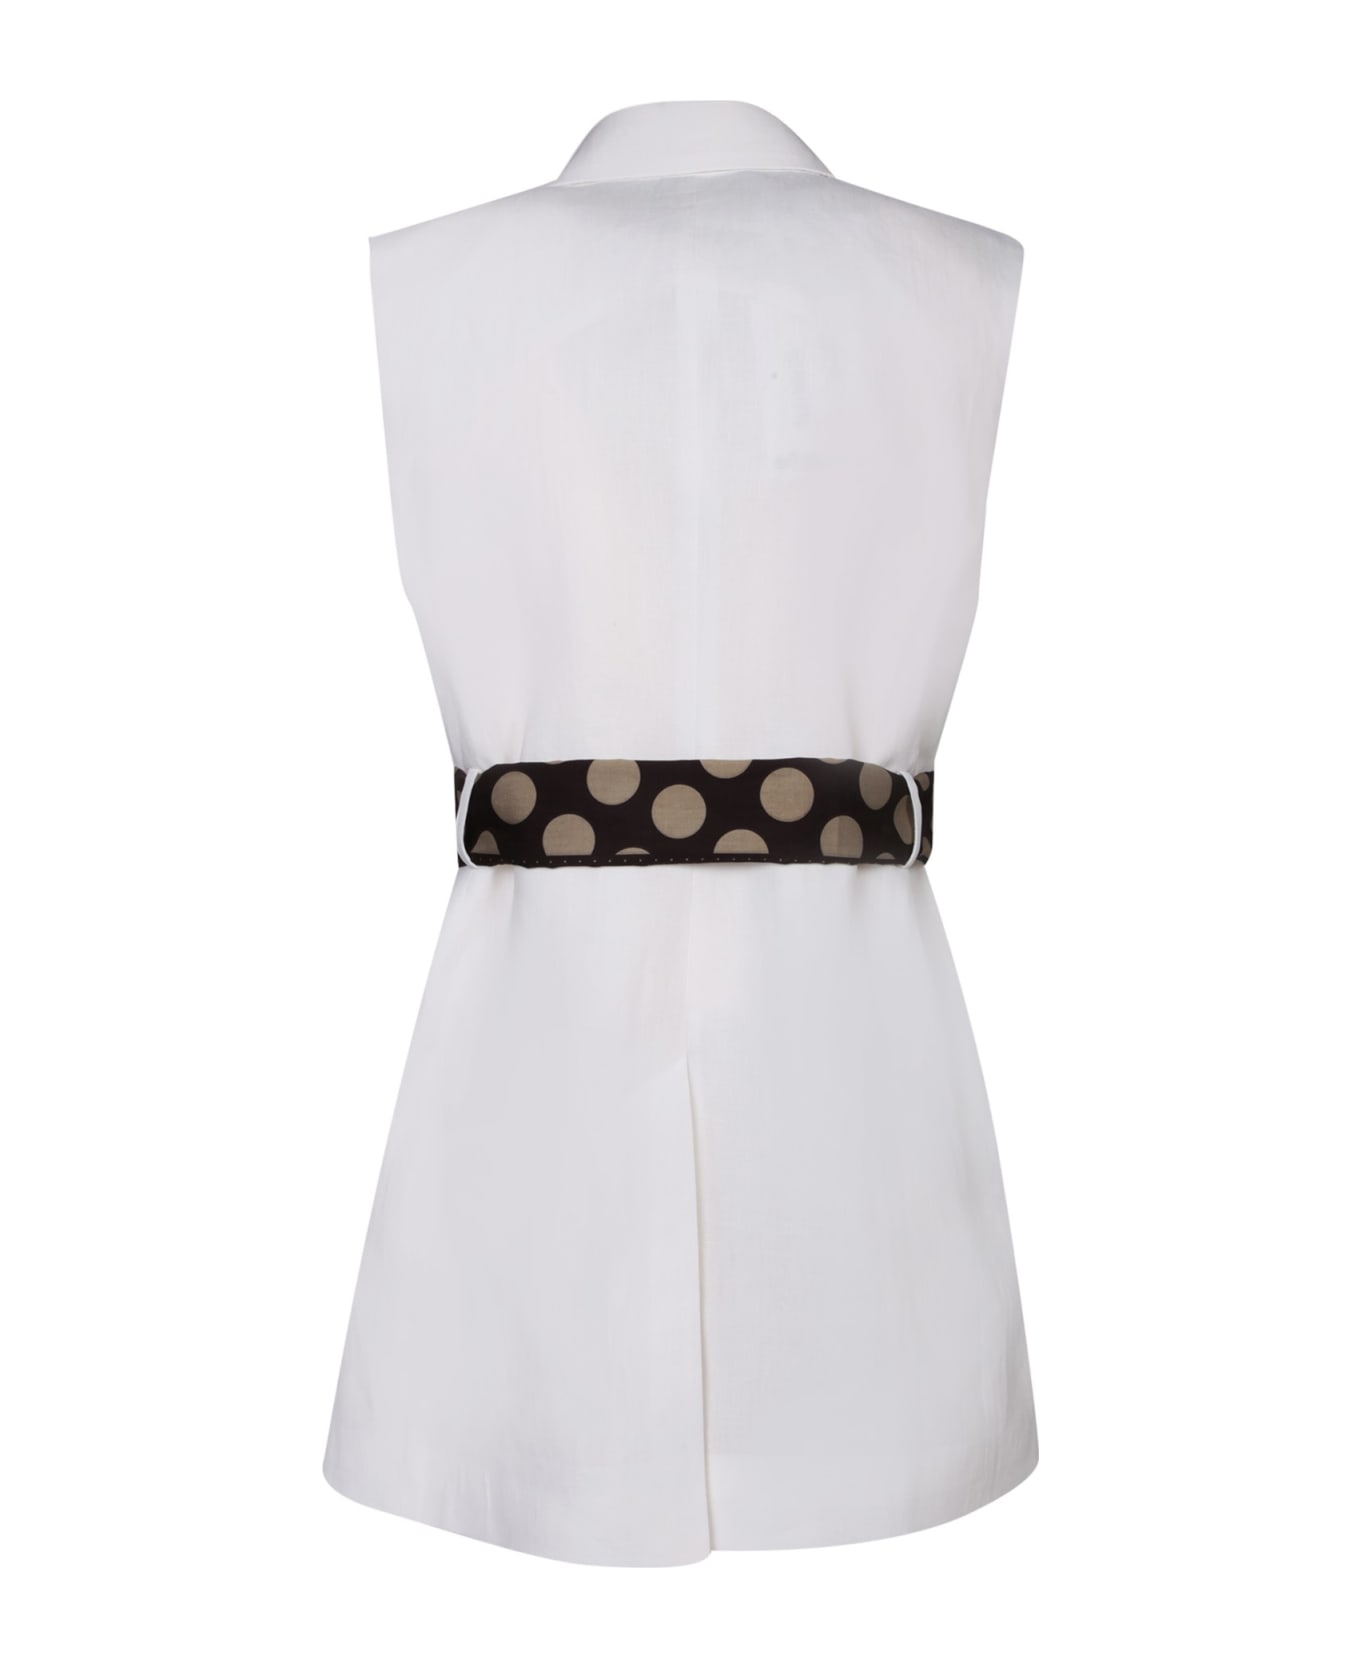 Paul Smith Belted White Vest - White